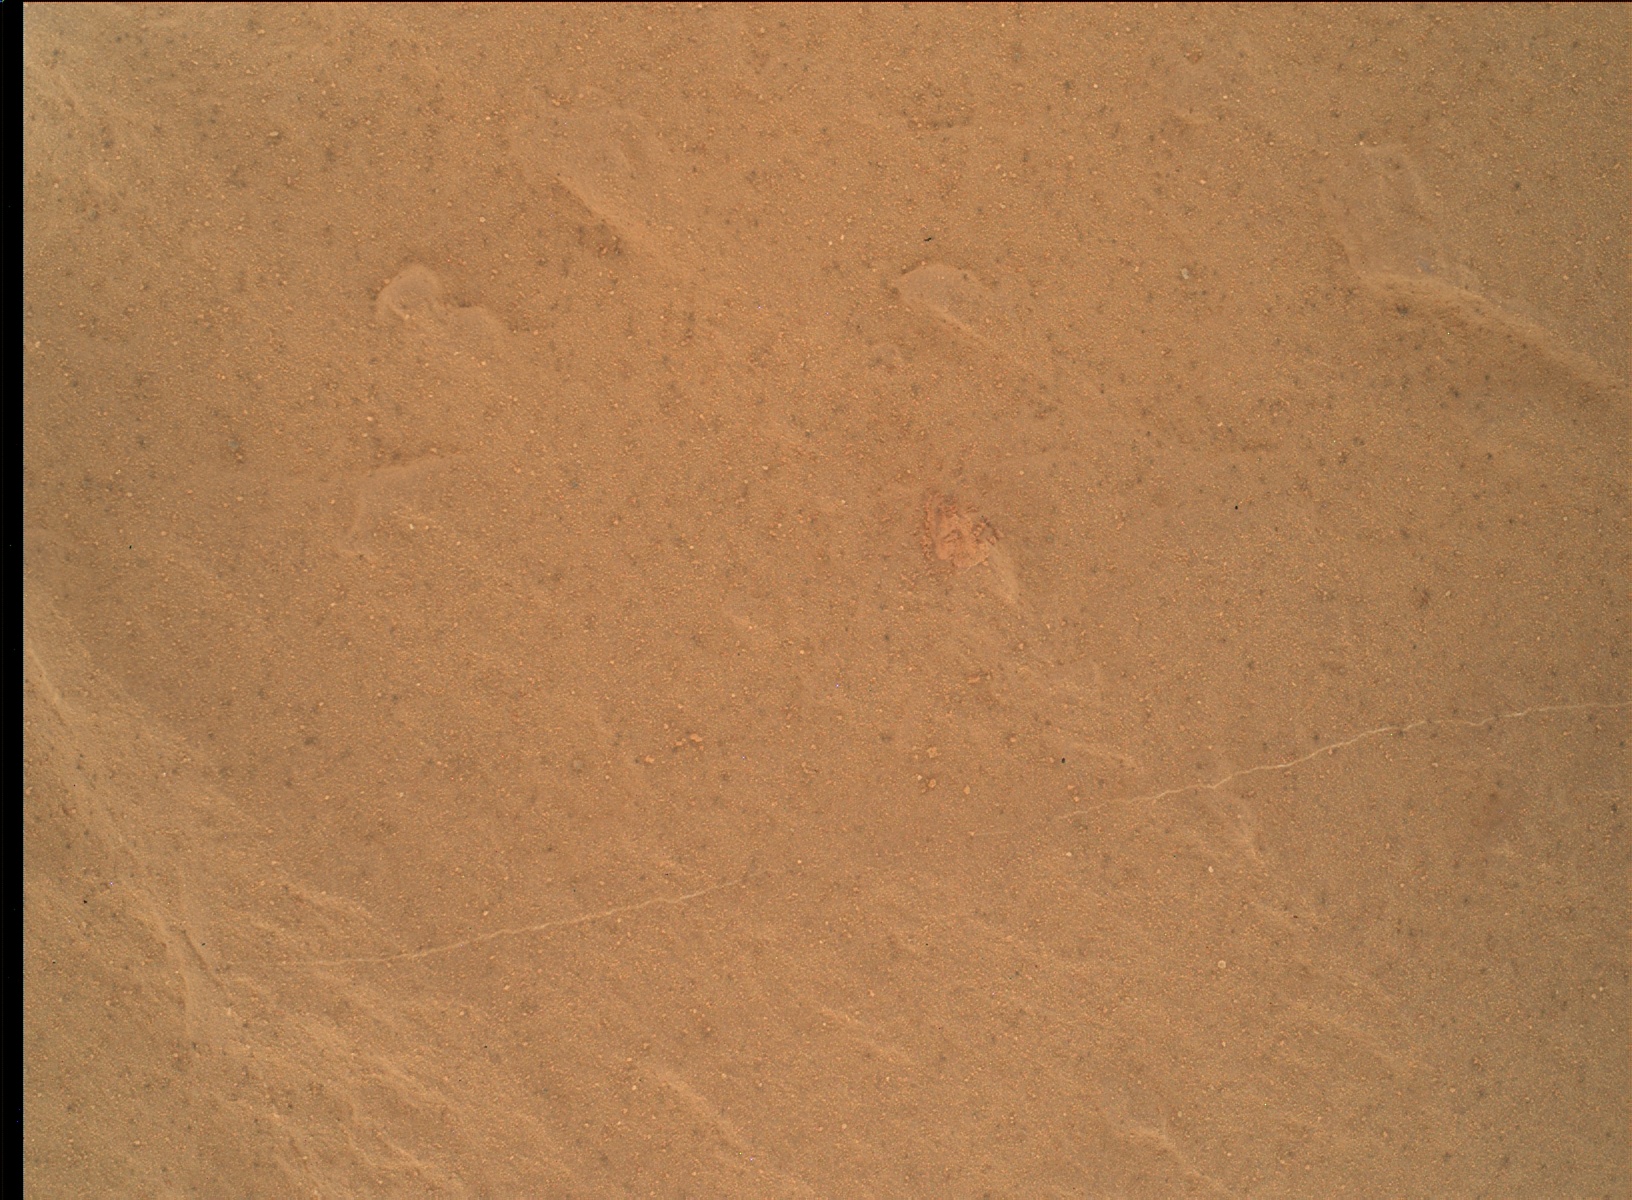 Nasa's Mars rover Curiosity acquired this image using its Mars Hand Lens Imager (MAHLI) on Sol 1848